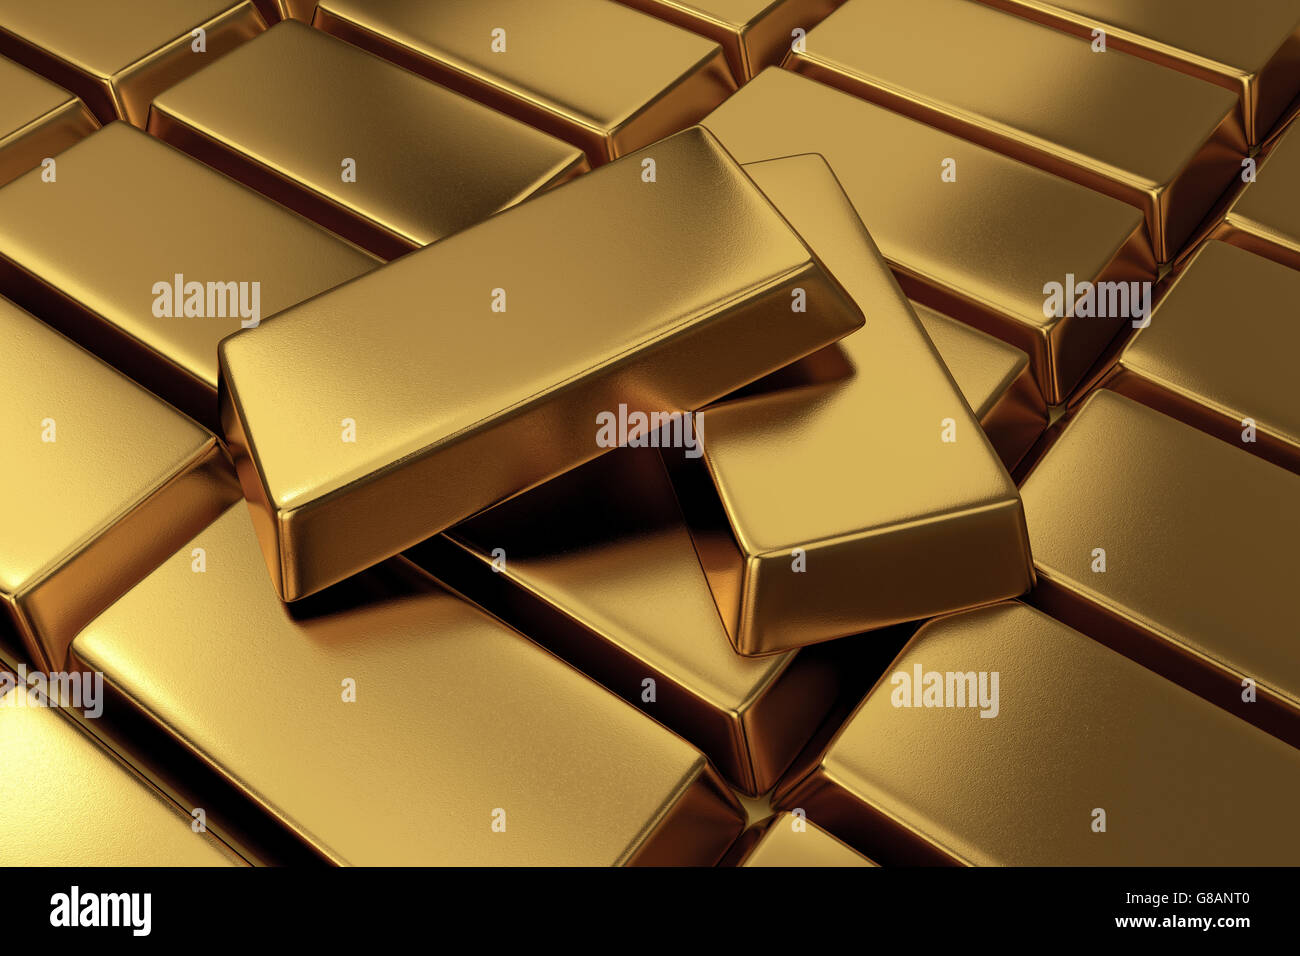 rows of gold bars,3d rendering Stock Photo